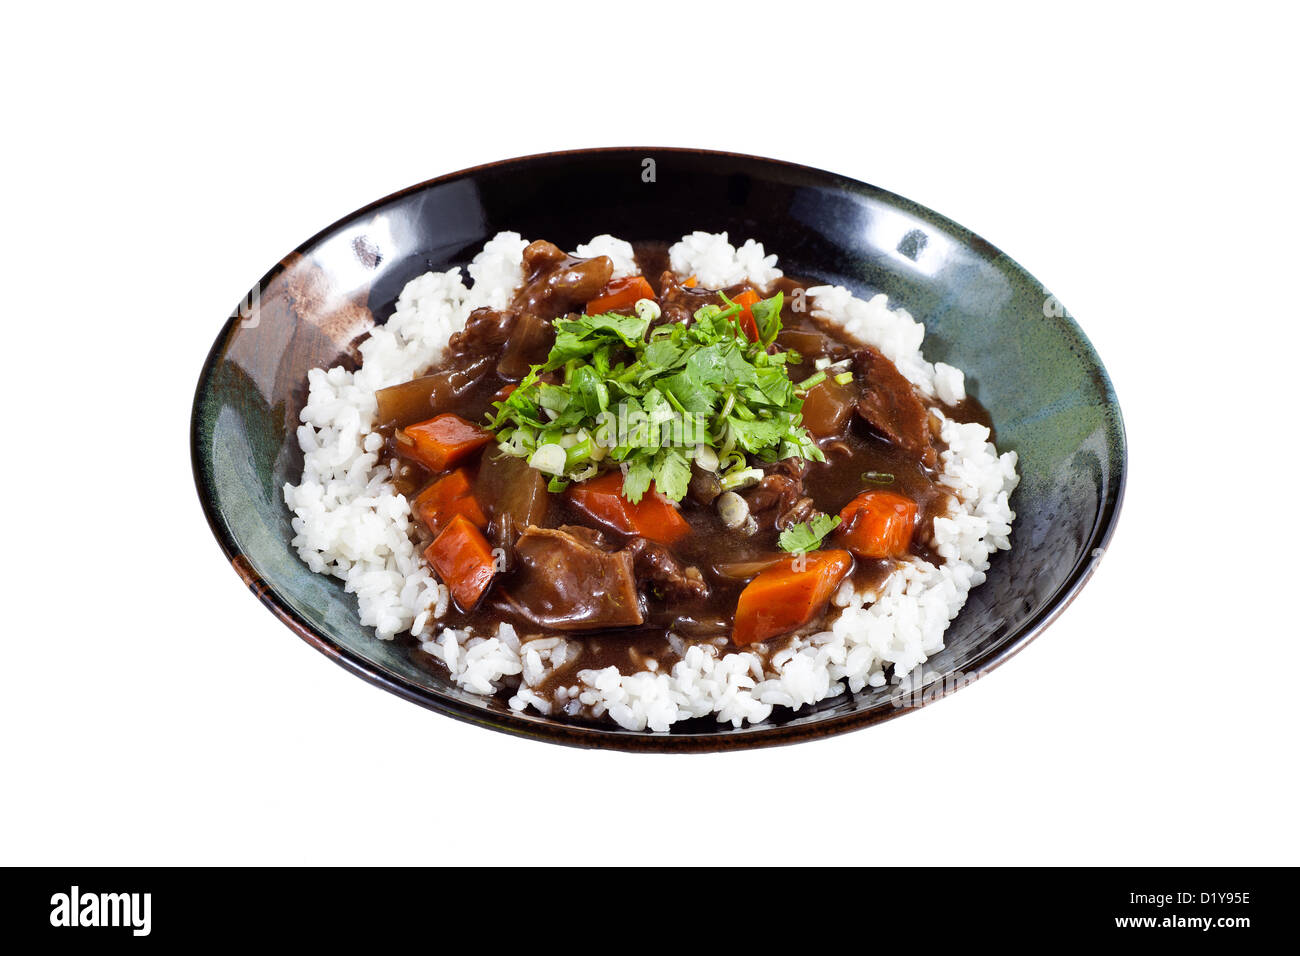 beef rice for adv or others purpose use Stock Photo